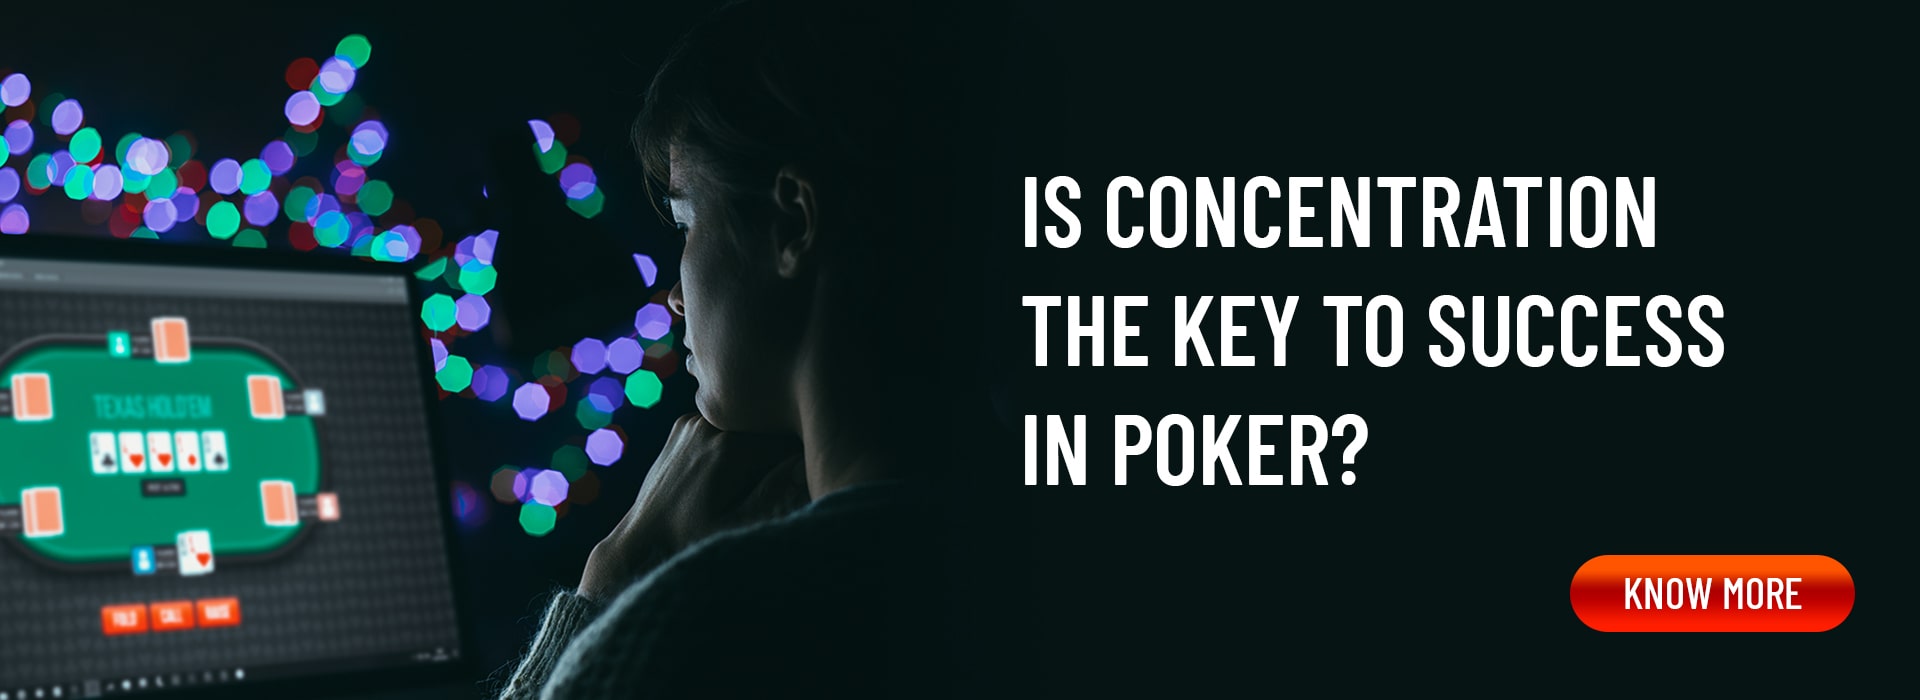 Concentration key to success in online poker